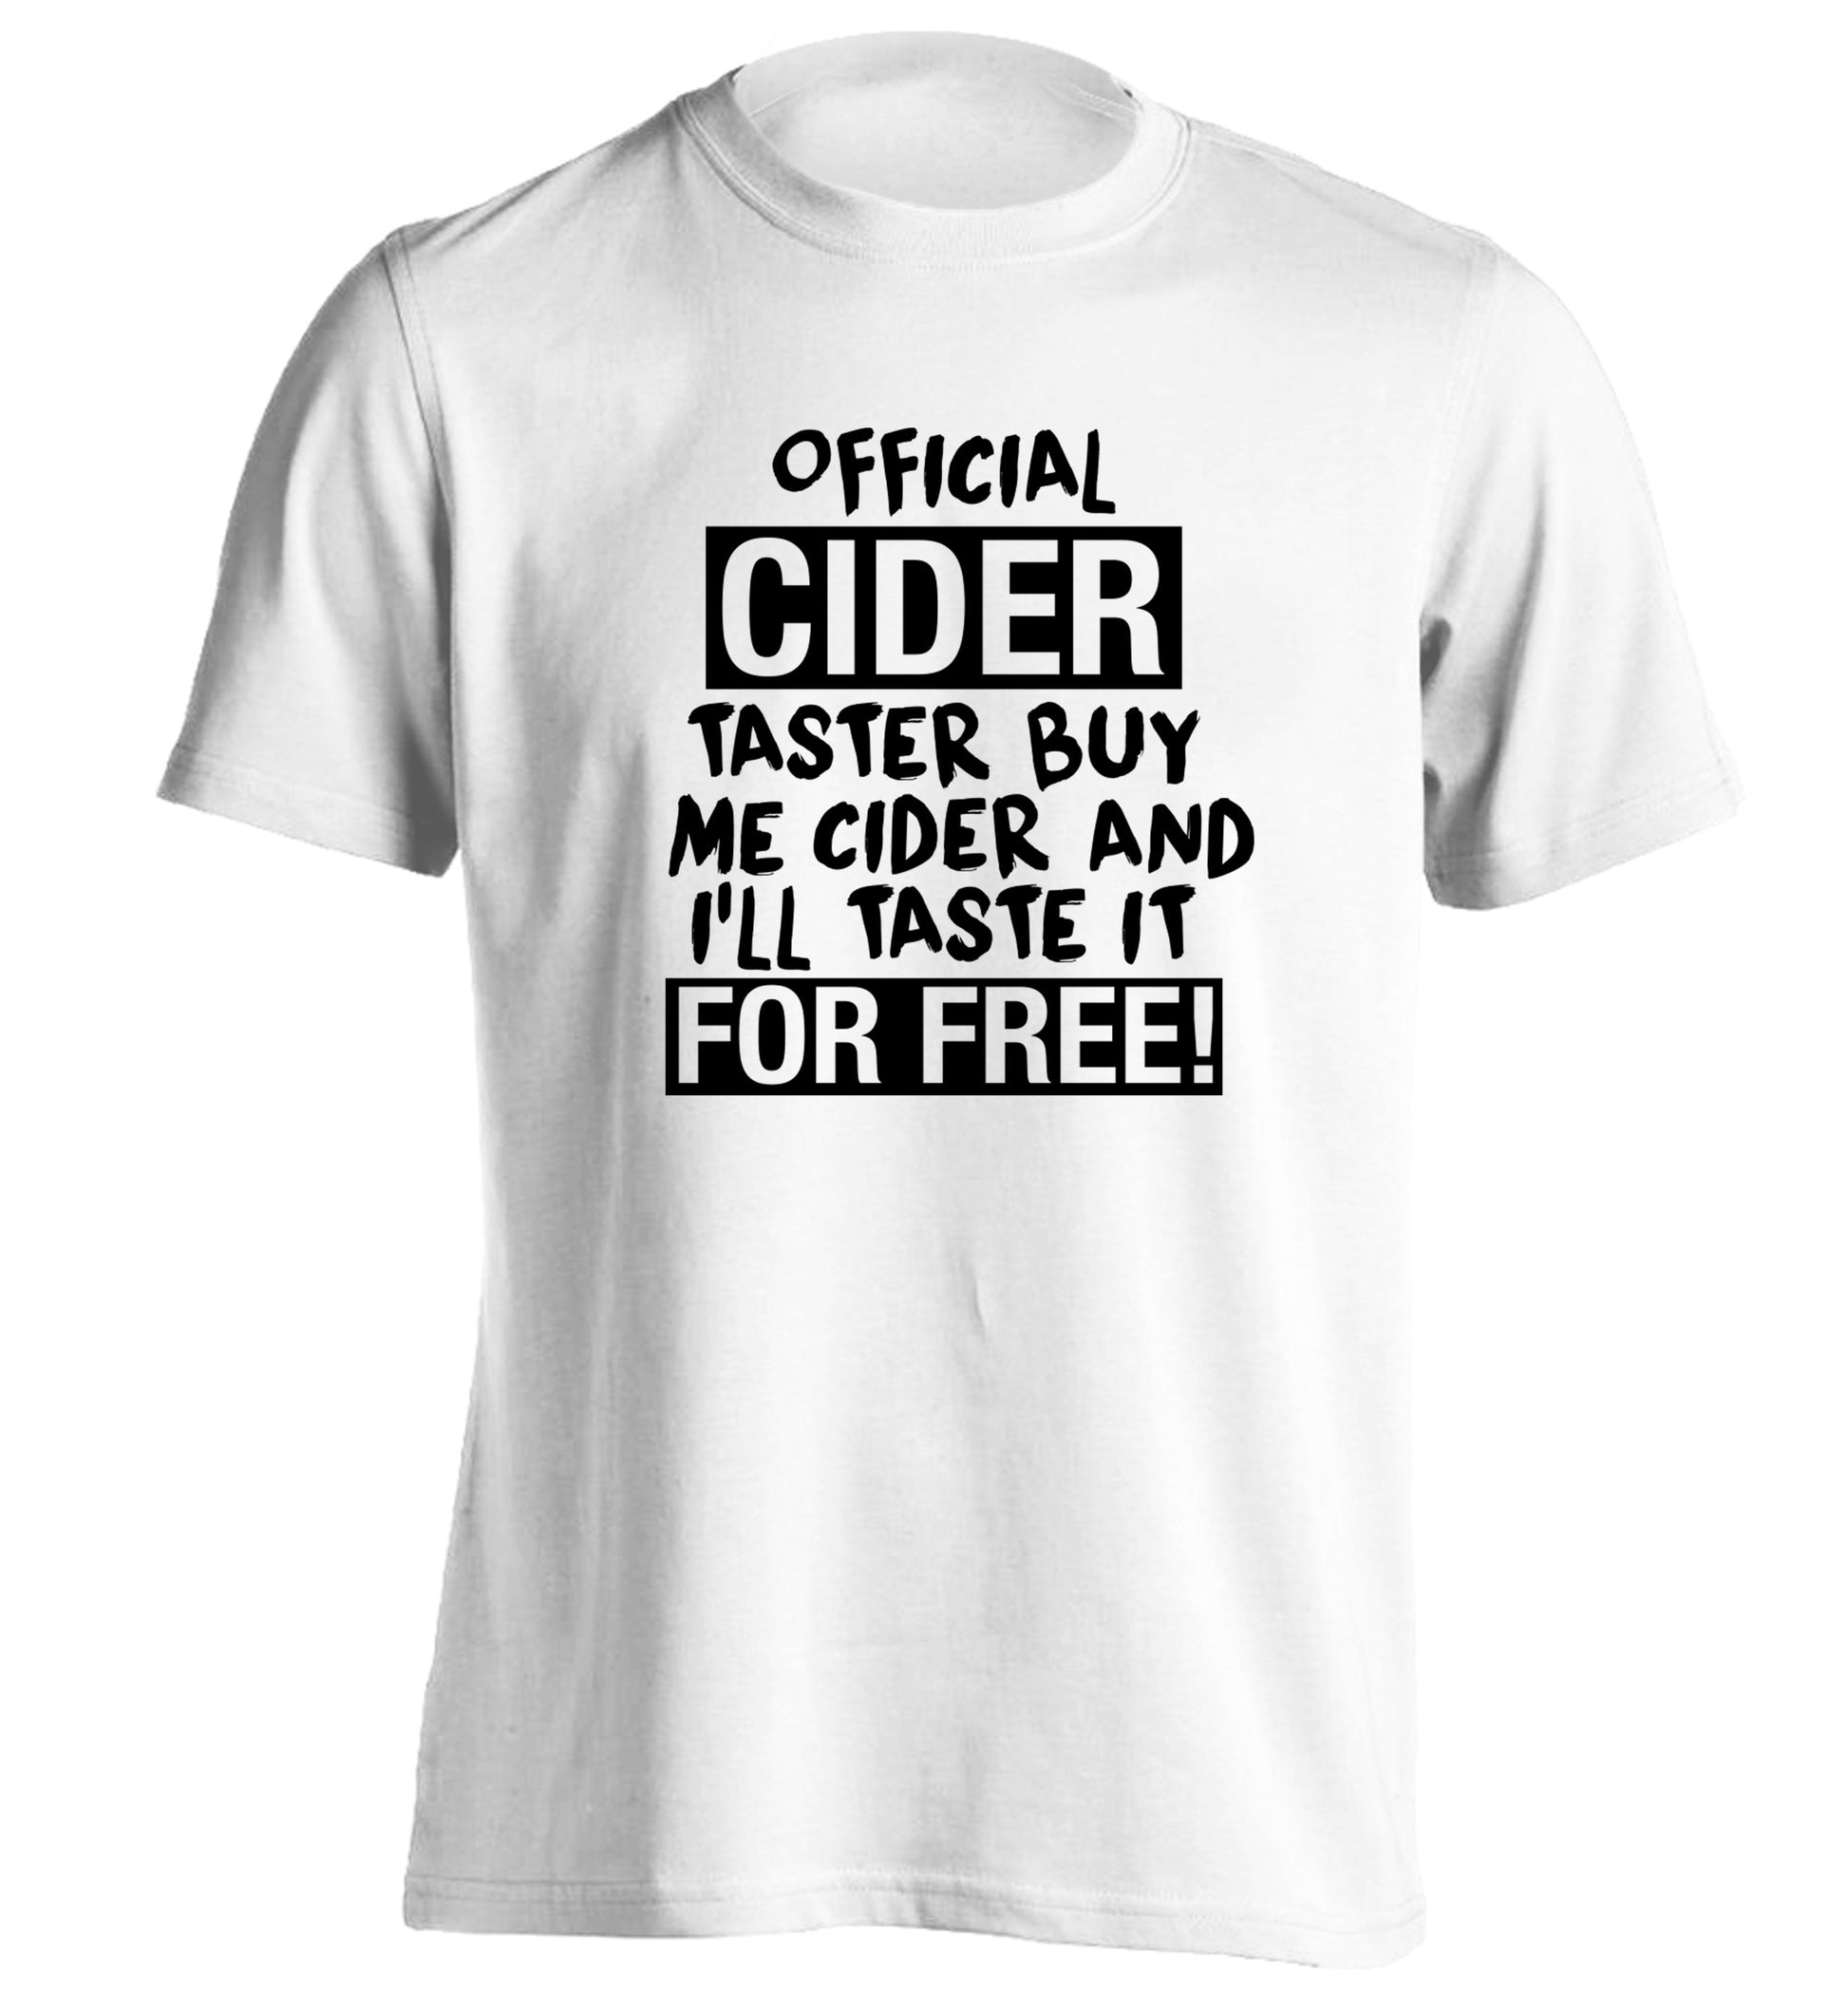 Official cider taster buy me cider and I'll taste it for free! adults unisex white Tshirt 2XL